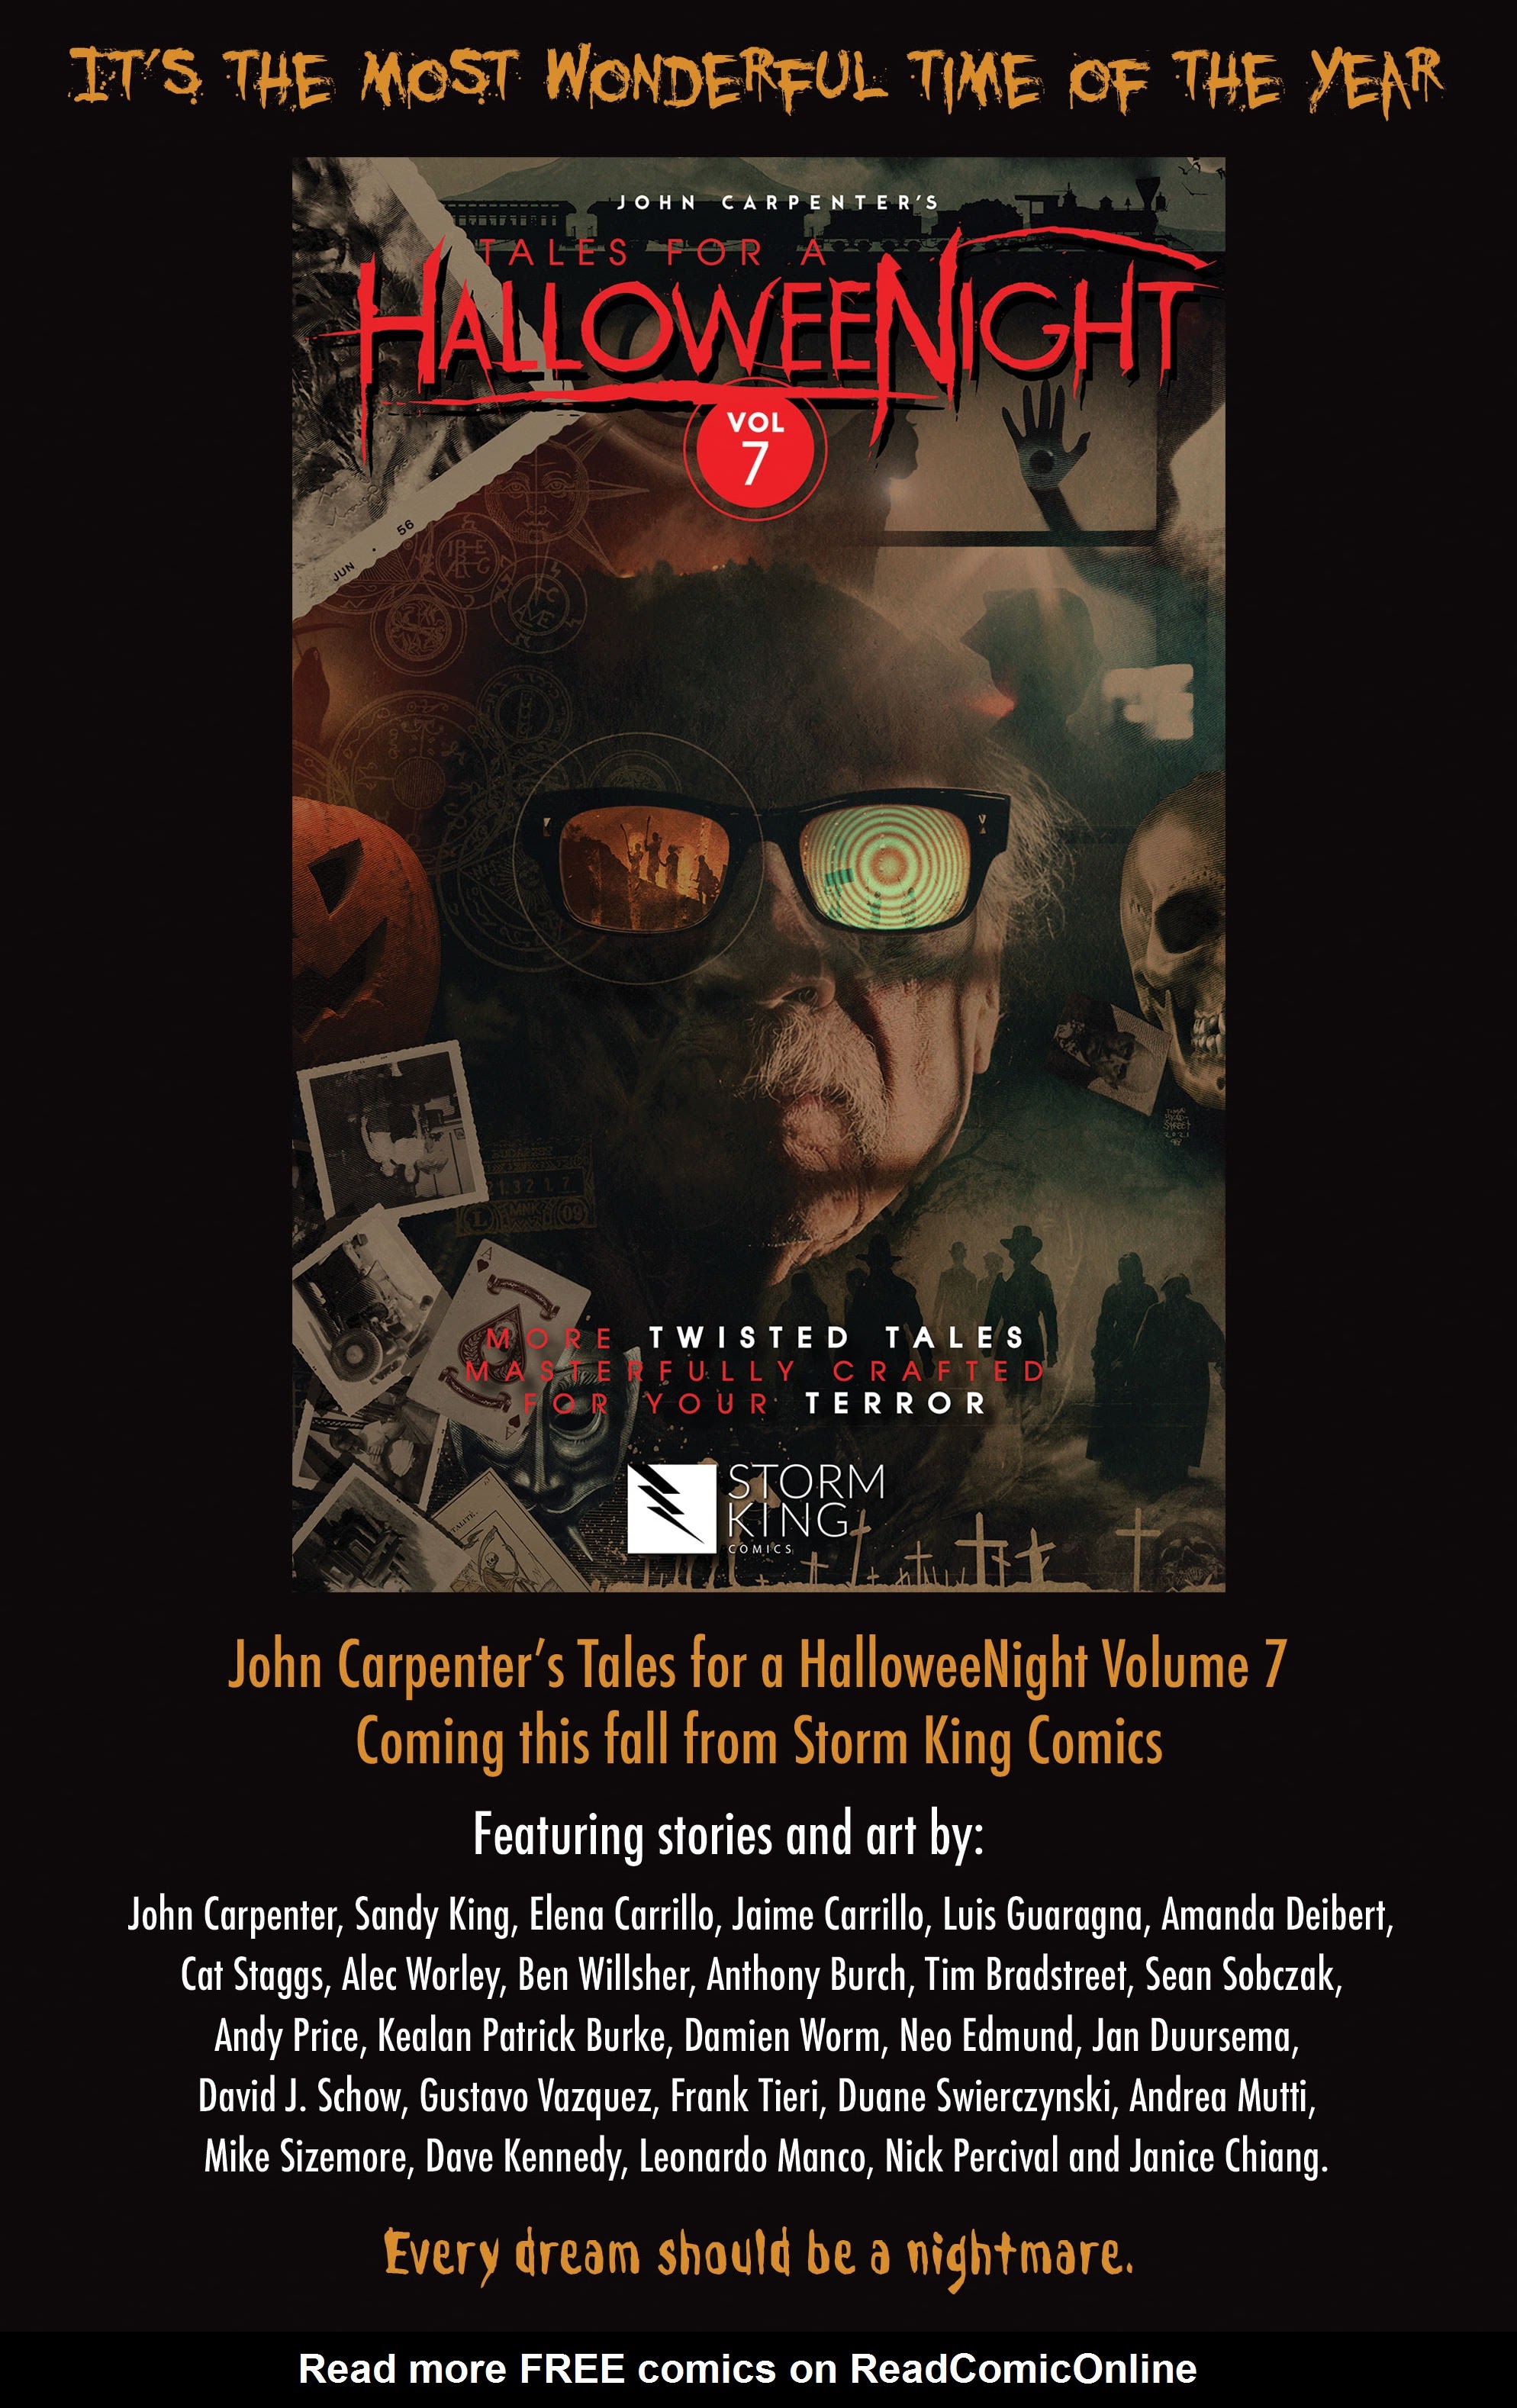 Read online John Carpenter's Tales of Science Fiction: HELL comic -  Issue #1 - 30